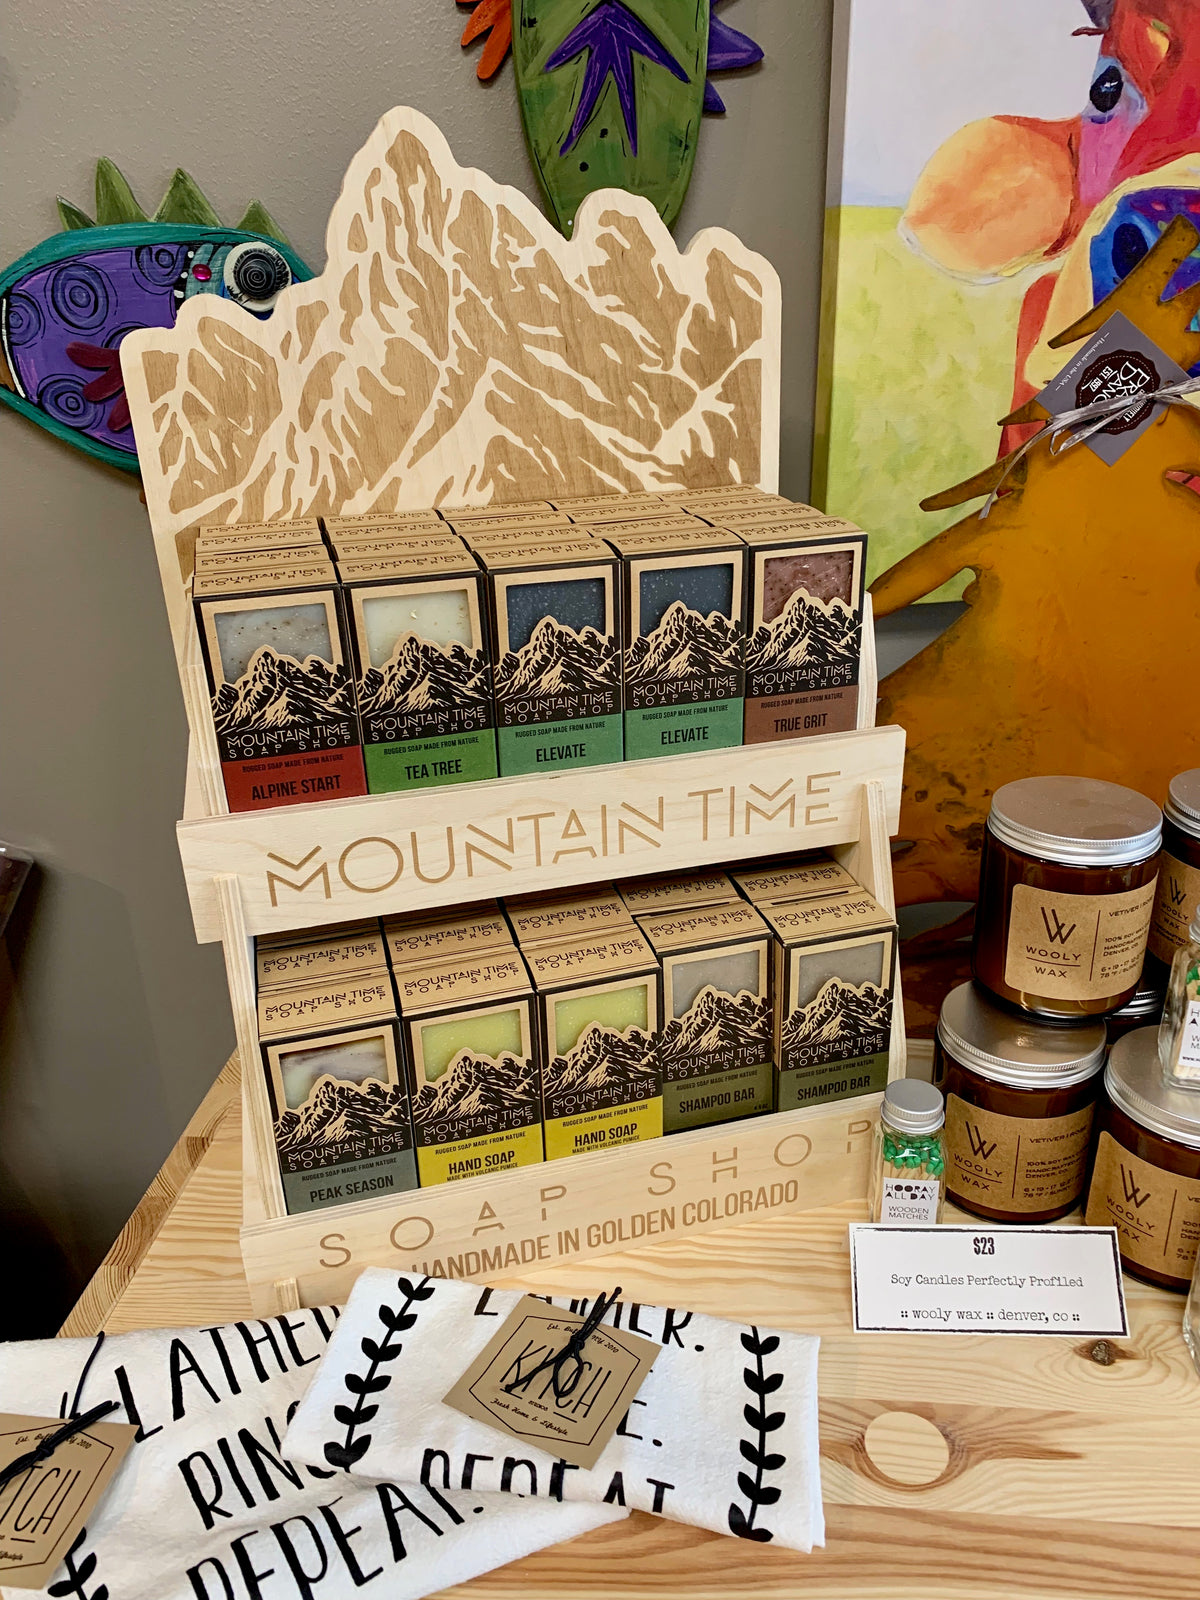 Mountain Time Soap Shop Display at Period Six Studio